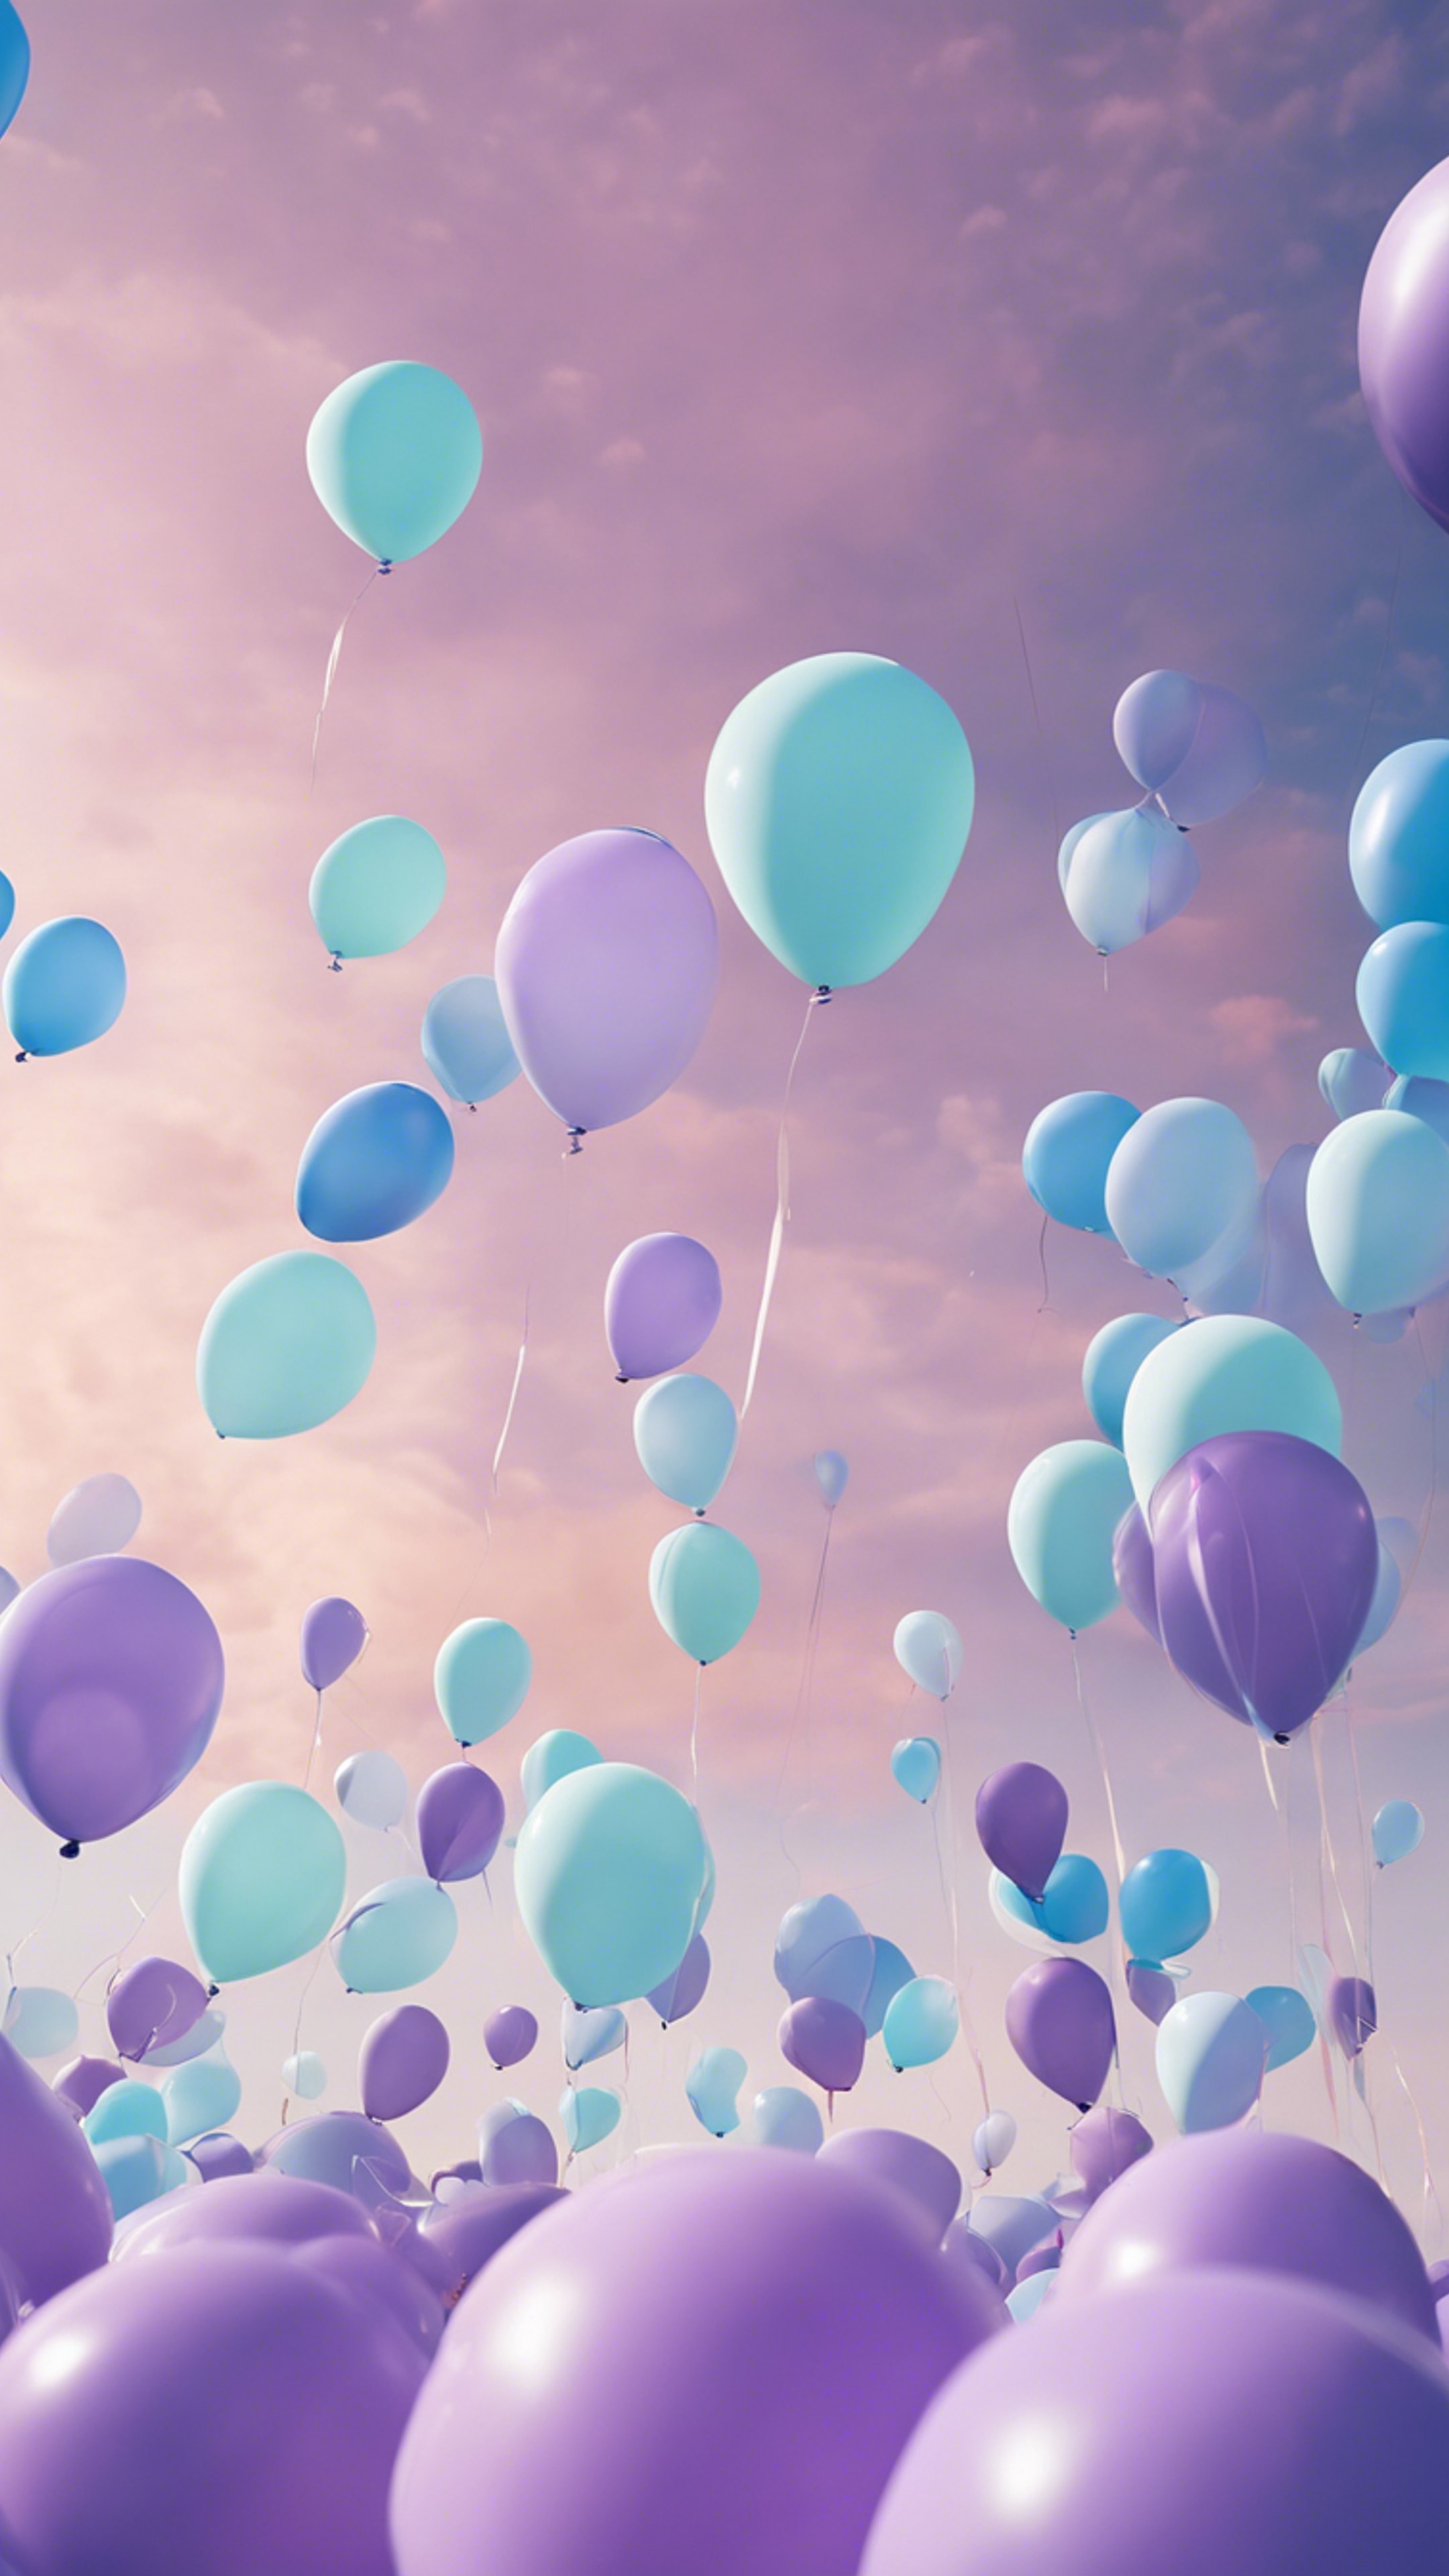 A whimsical scene of pastel purple and blue balloons filling the summer sky.壁紙[fd1f8f768f0047c48fb6]